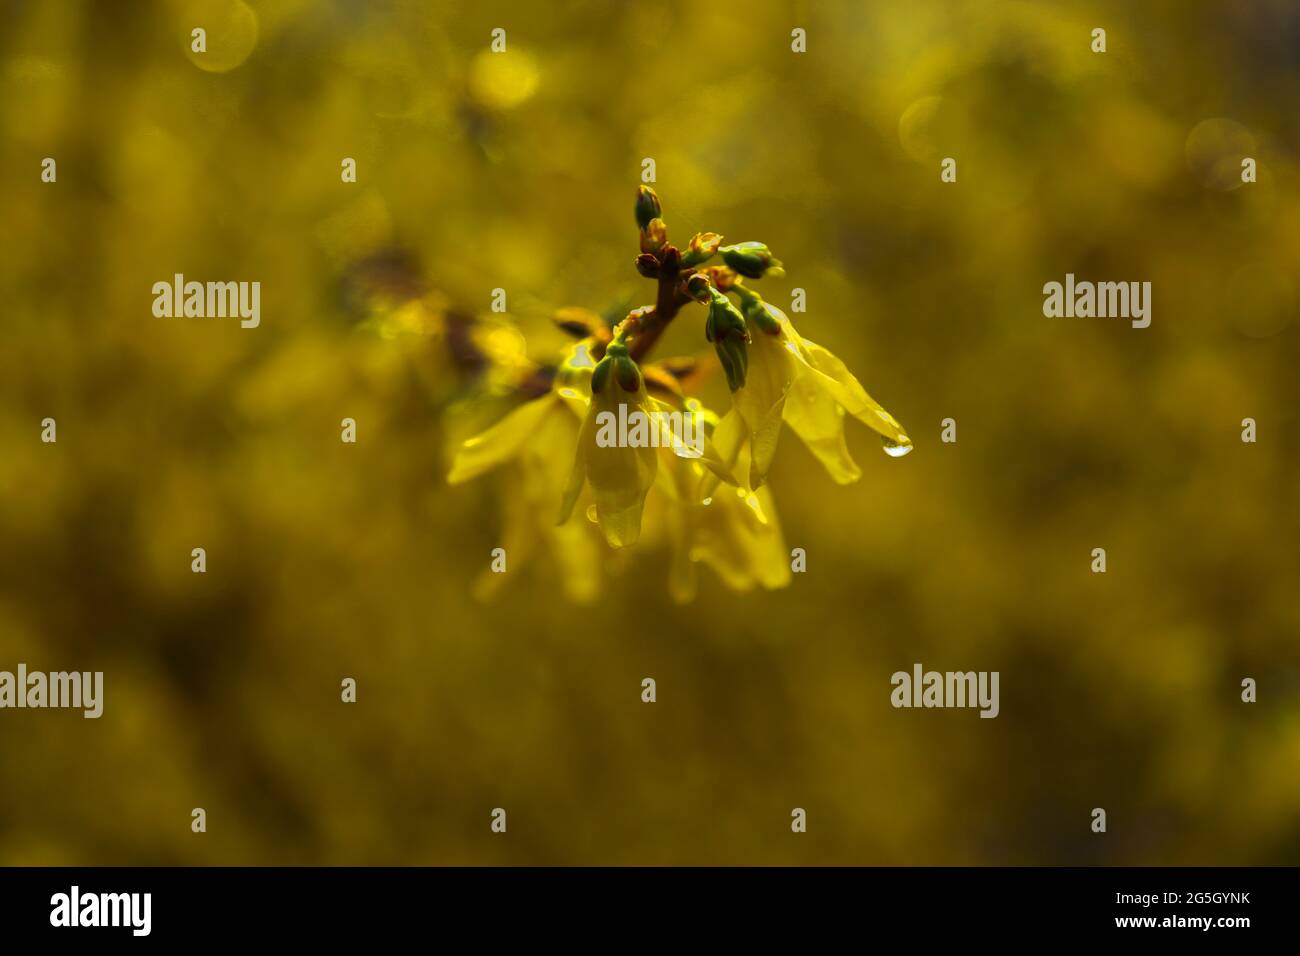 A branch of flowering Forsythia emerging from the bush. Stock Photo